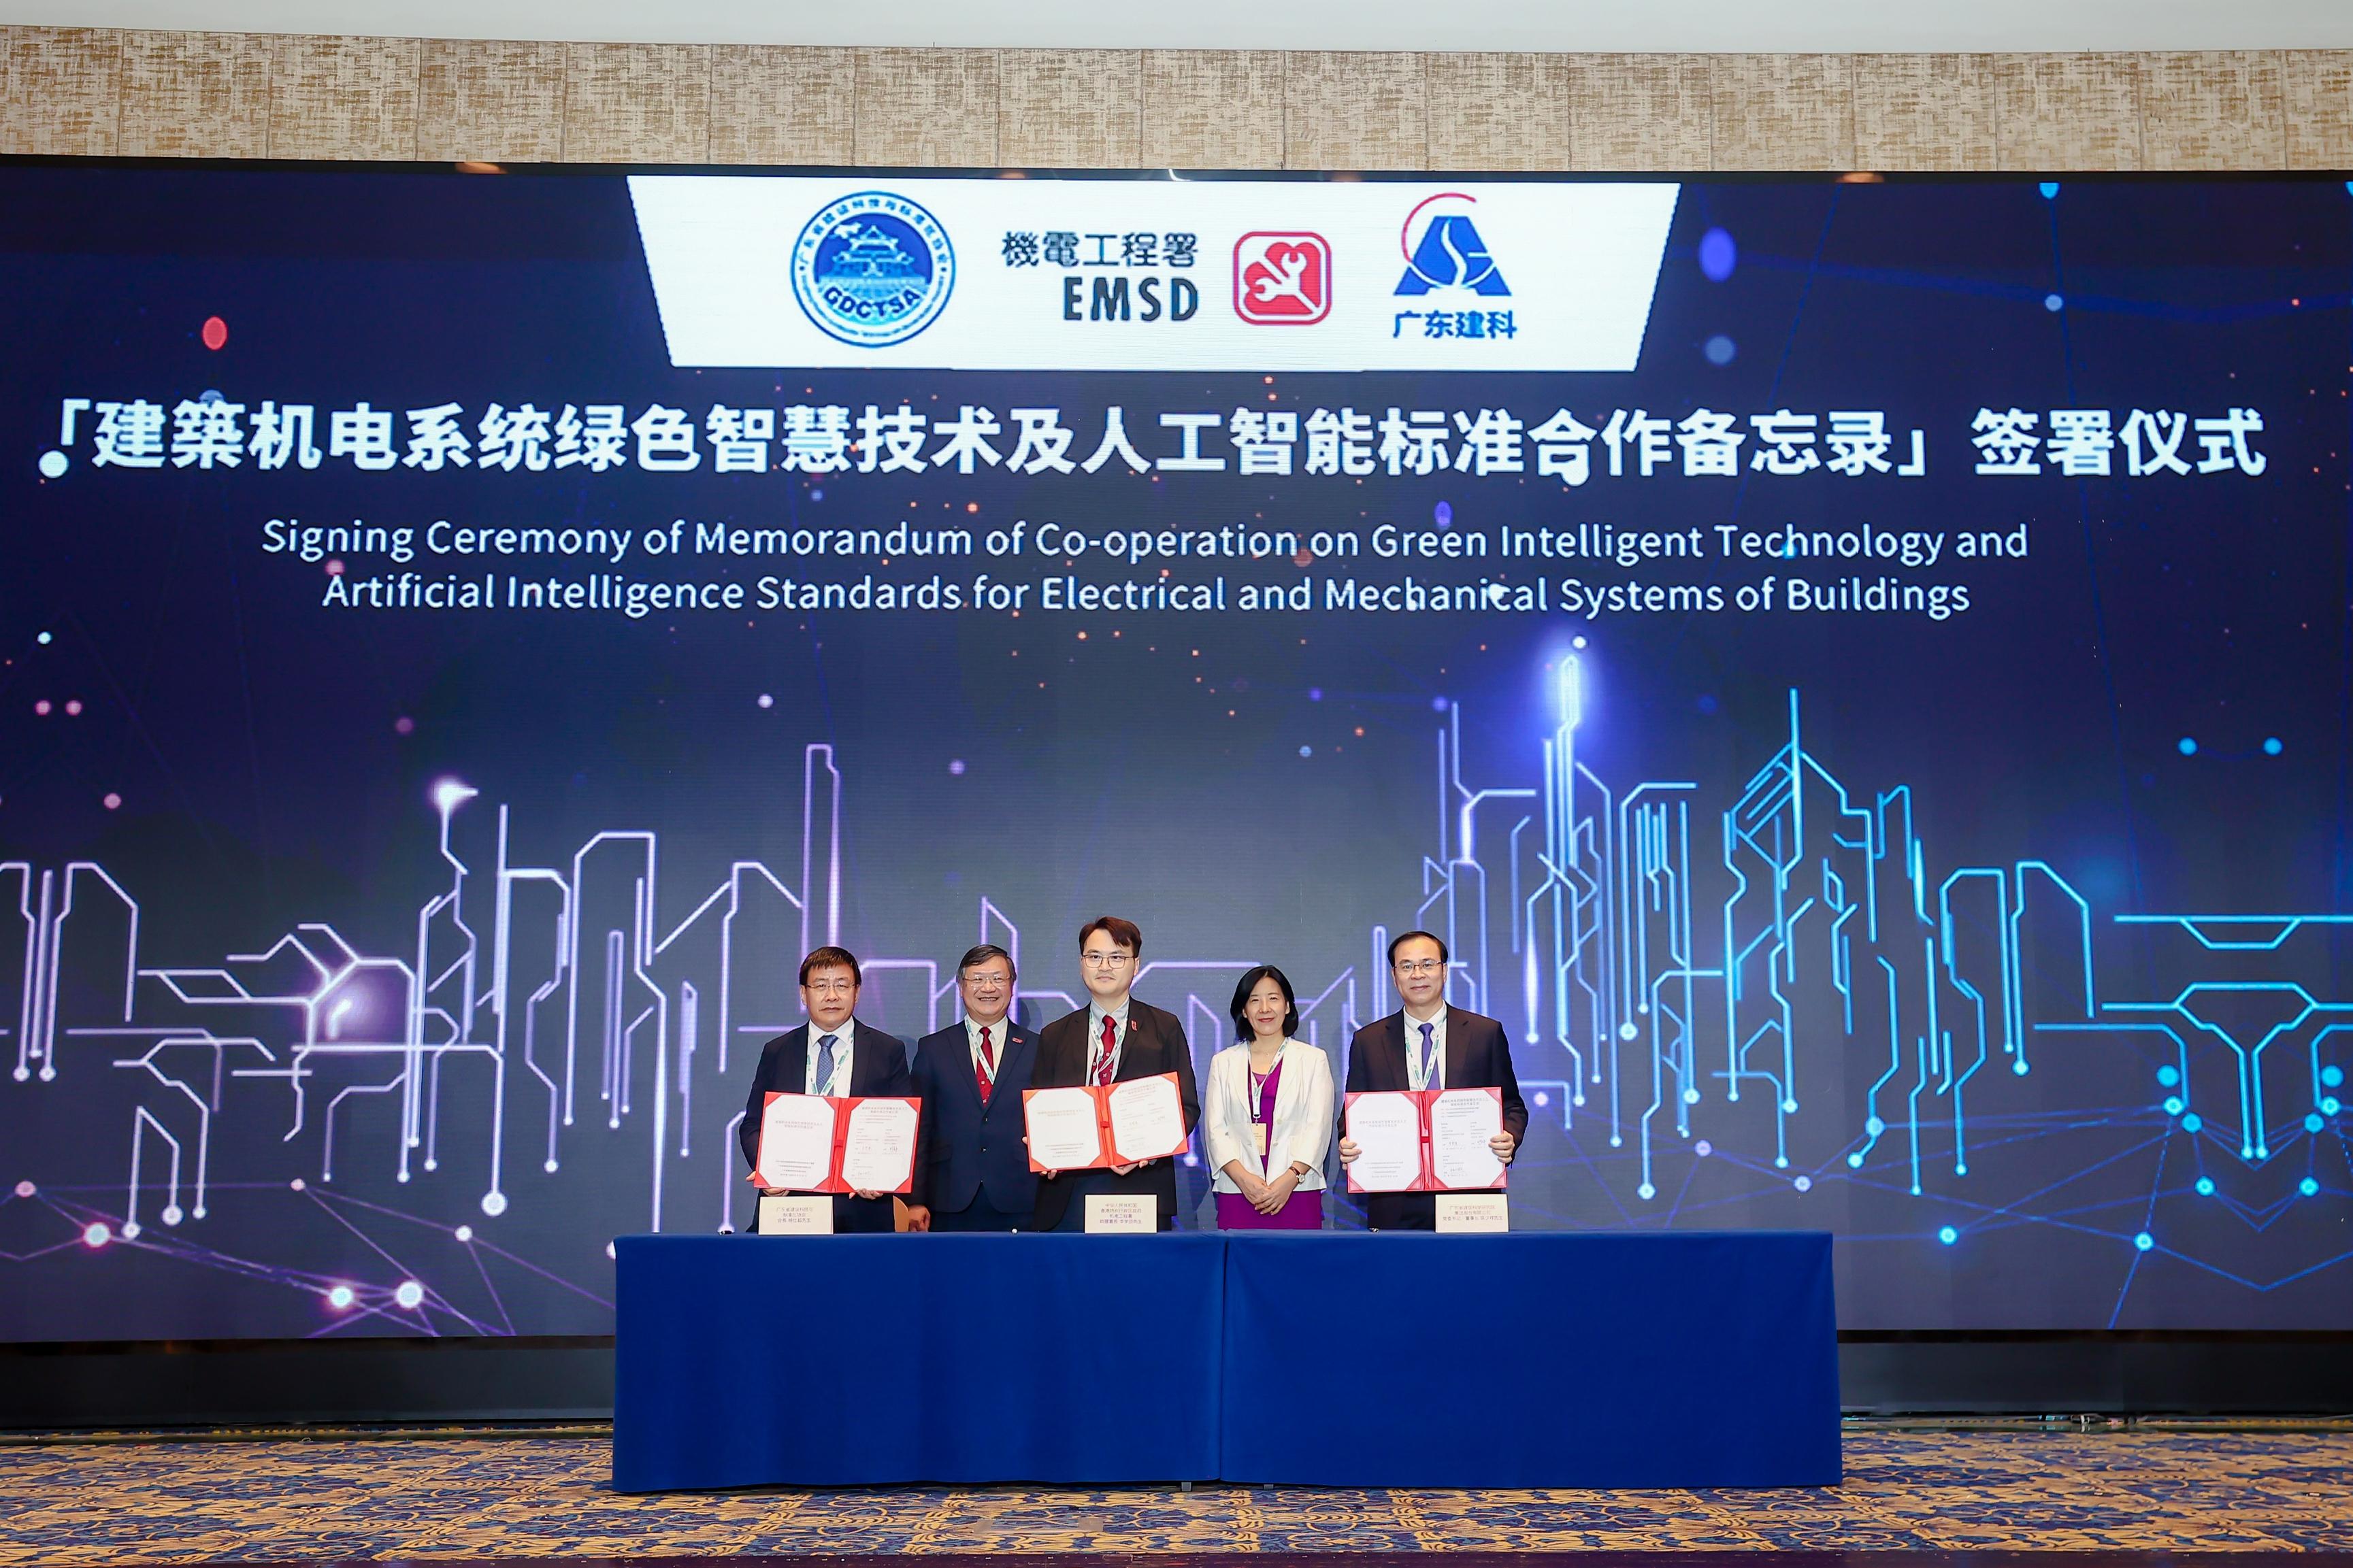 The Electrical and Mechanical Services Department (EMSD) and the Guangdong Provincial Association for Science and Technology jointly held the Green I&T Day 2023 today (September 14). At the event, the EMSD signed the "Memorandum of Co-operation on Green Intelligent Technology and Artificial Intelligence Standards for Electrical and Mechanical Systems of Buildings" with the Guangdong Provincial Academy of Building Research Group Co., Ltd. and the Guangdong Province Construction Technology and Standardization Association. The Director of Electrical and Mechanical Services, Mr Eric Pang (second left), witnessed the signing. 